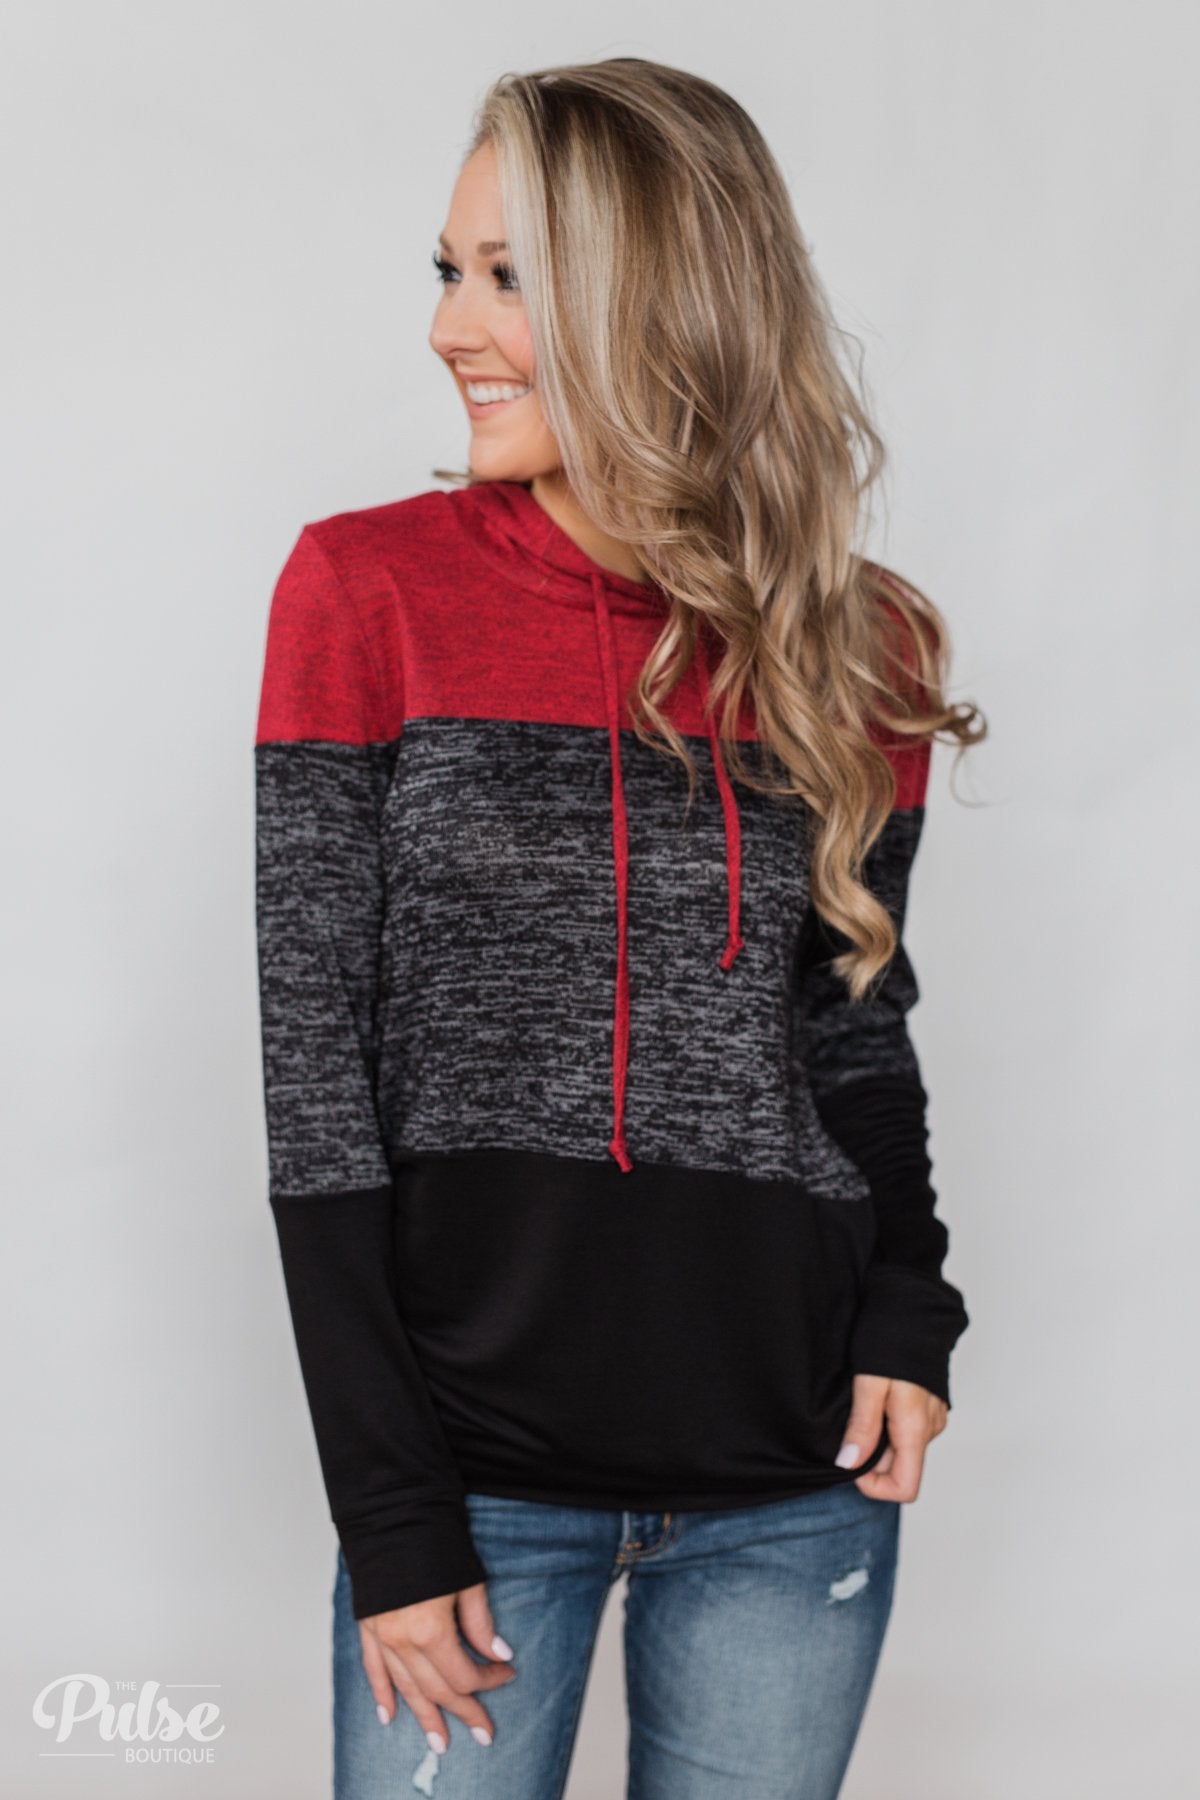 Come Together Color Block Hoodie - Red & Black